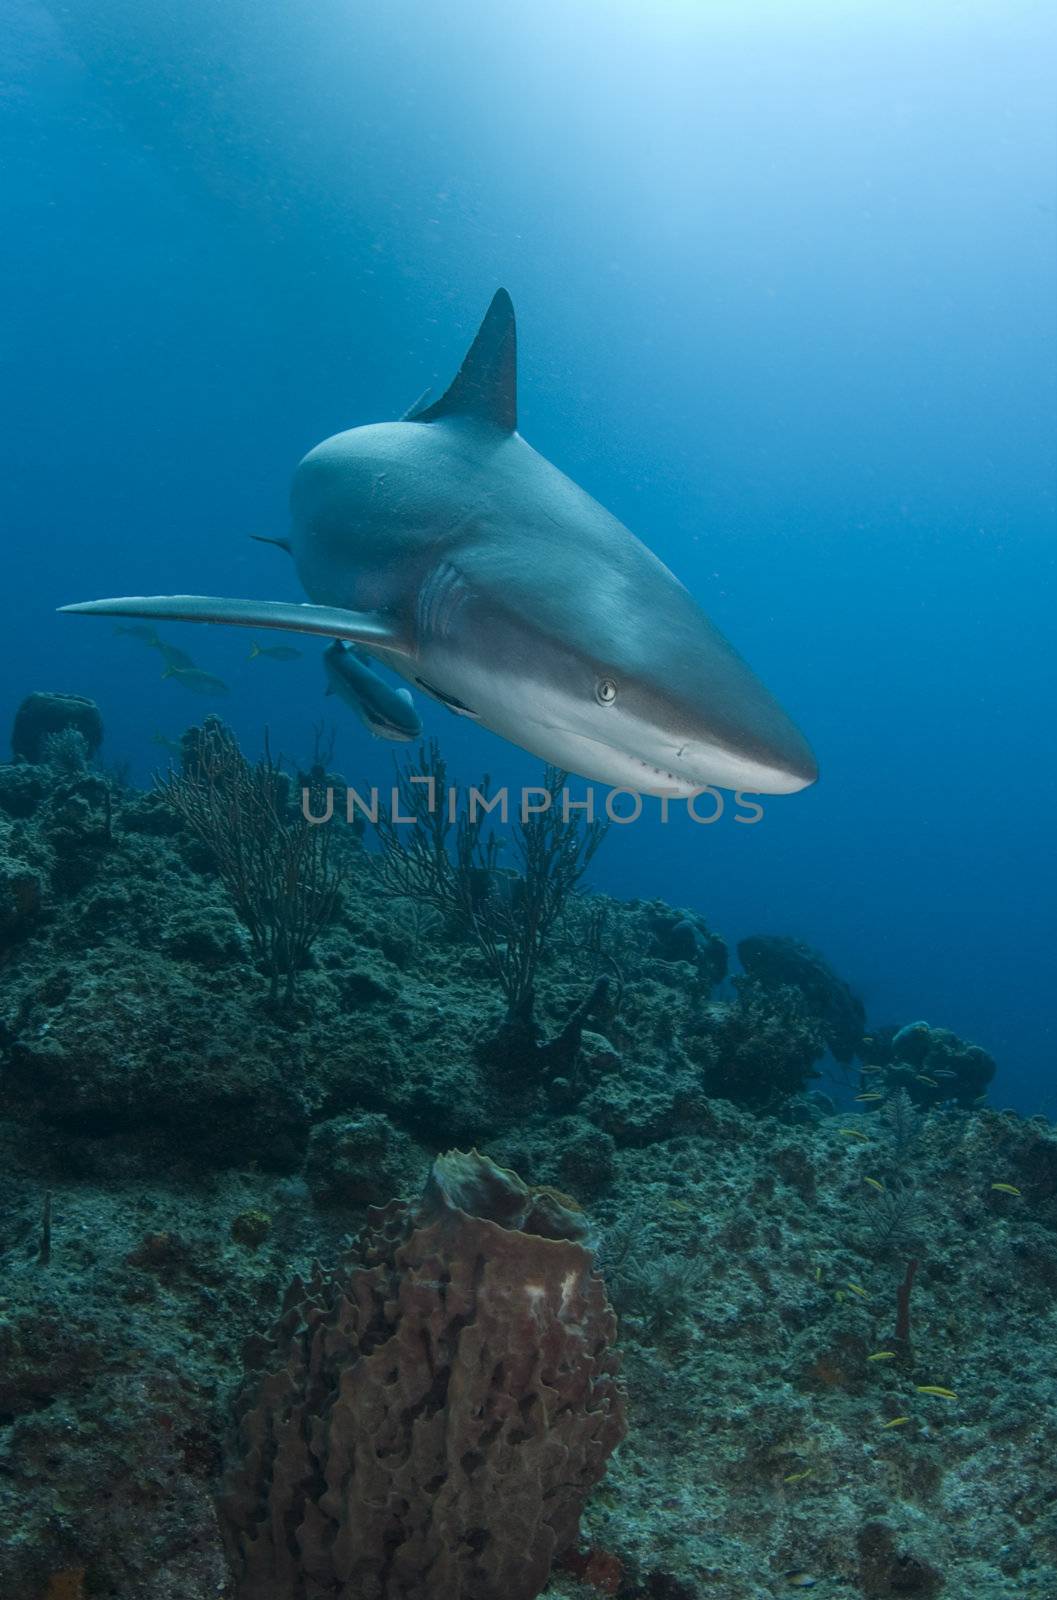 A Caribbean Reef Shark (Carcharhinius perezi) swims over a coral reef in the Bahamas, under the shadow of a boat on the surface